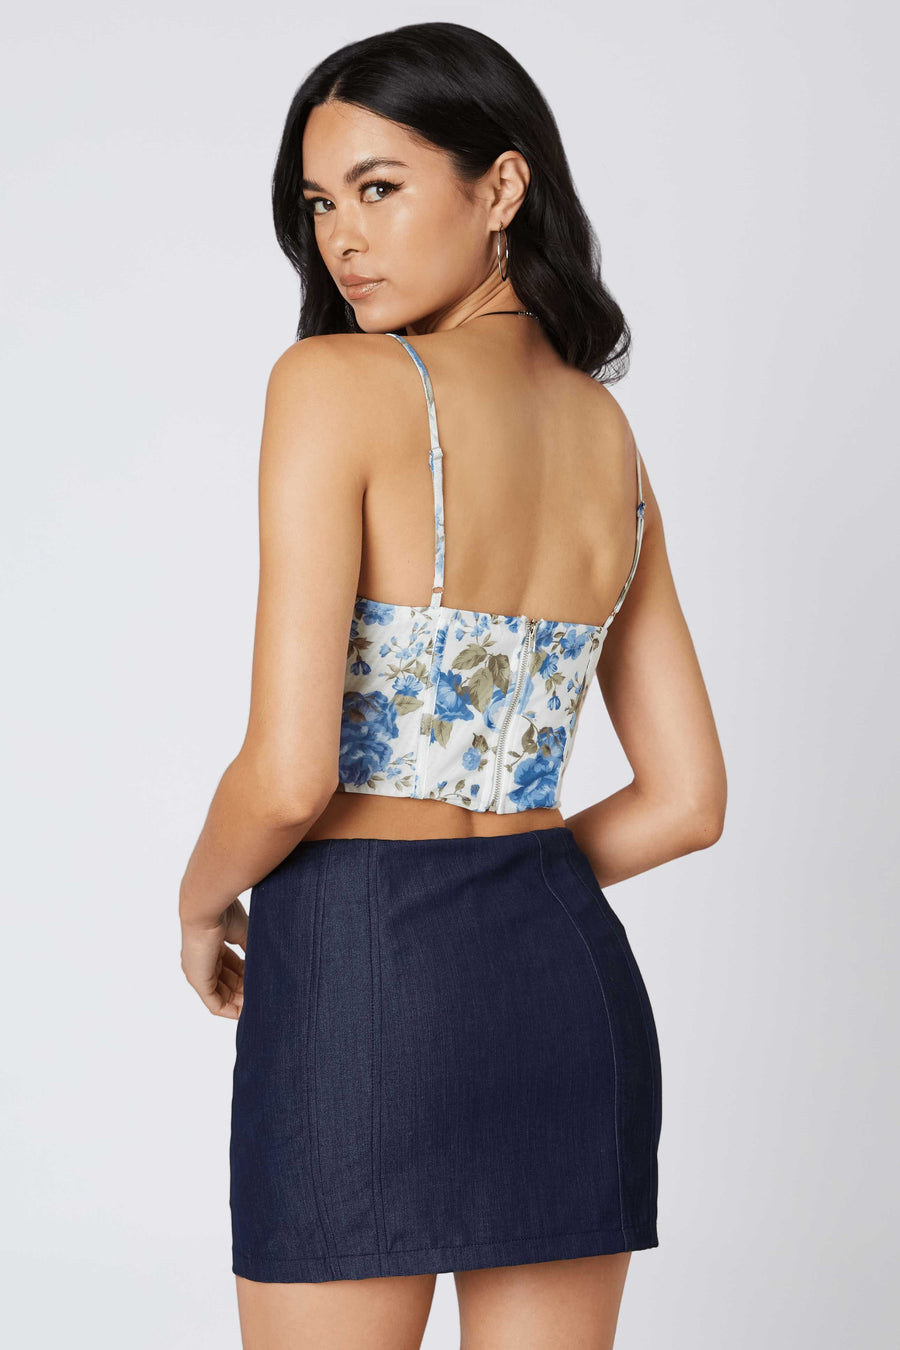  Corset style top with mesh fabric and floral pattern.